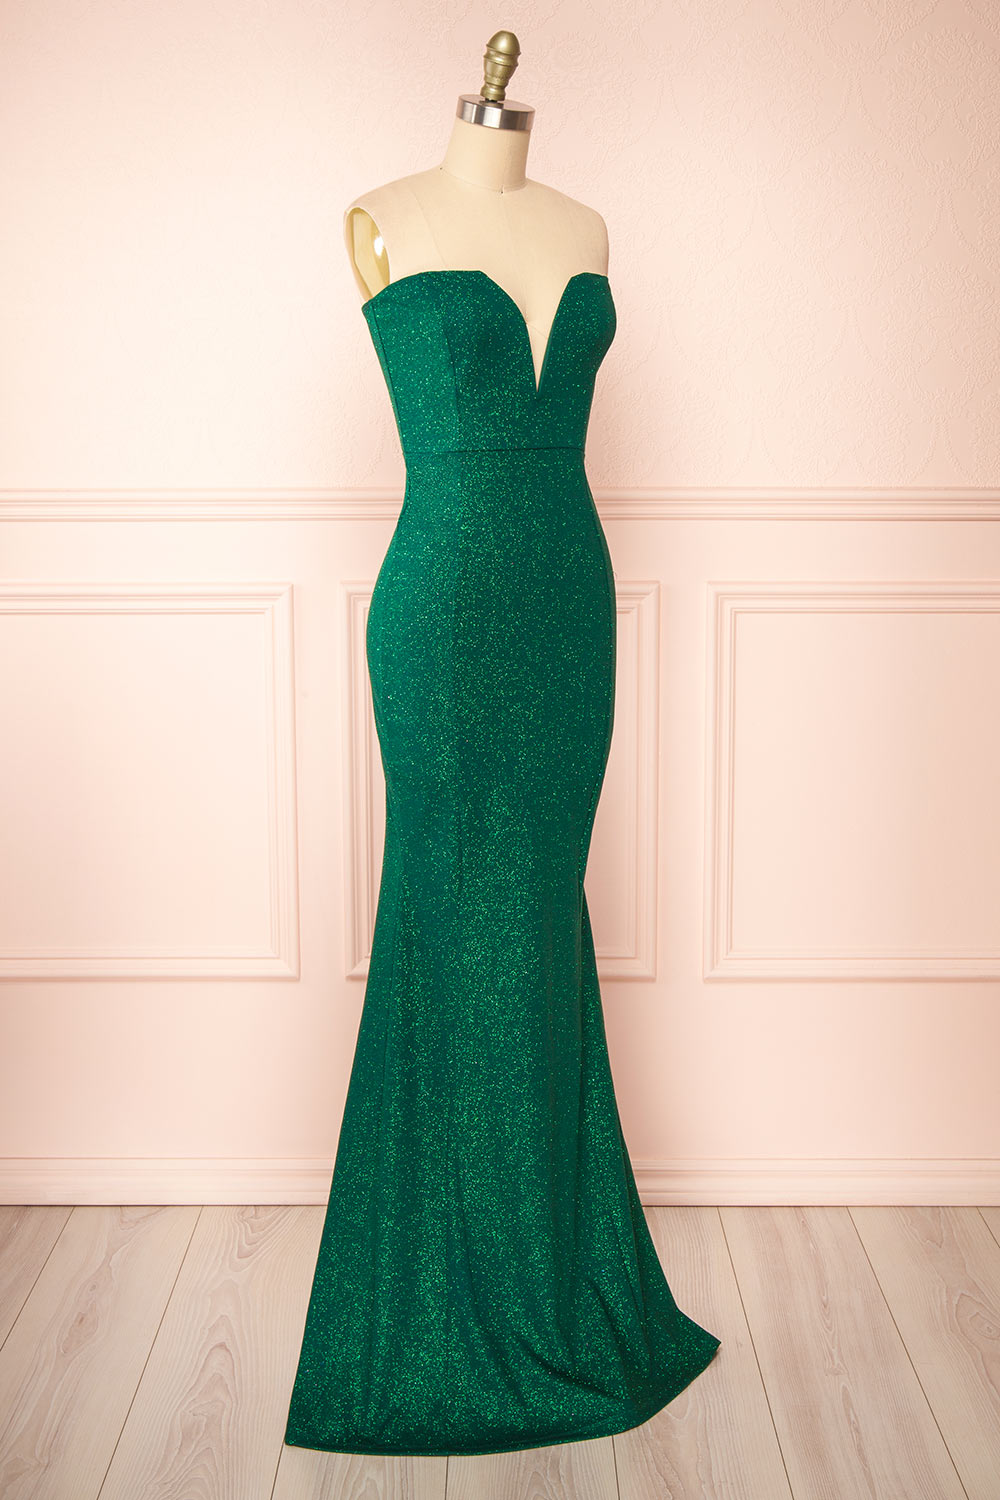 Norcia Green Shimmery Bustier Mermaid Maxi Dress | Boutique 1861  side view